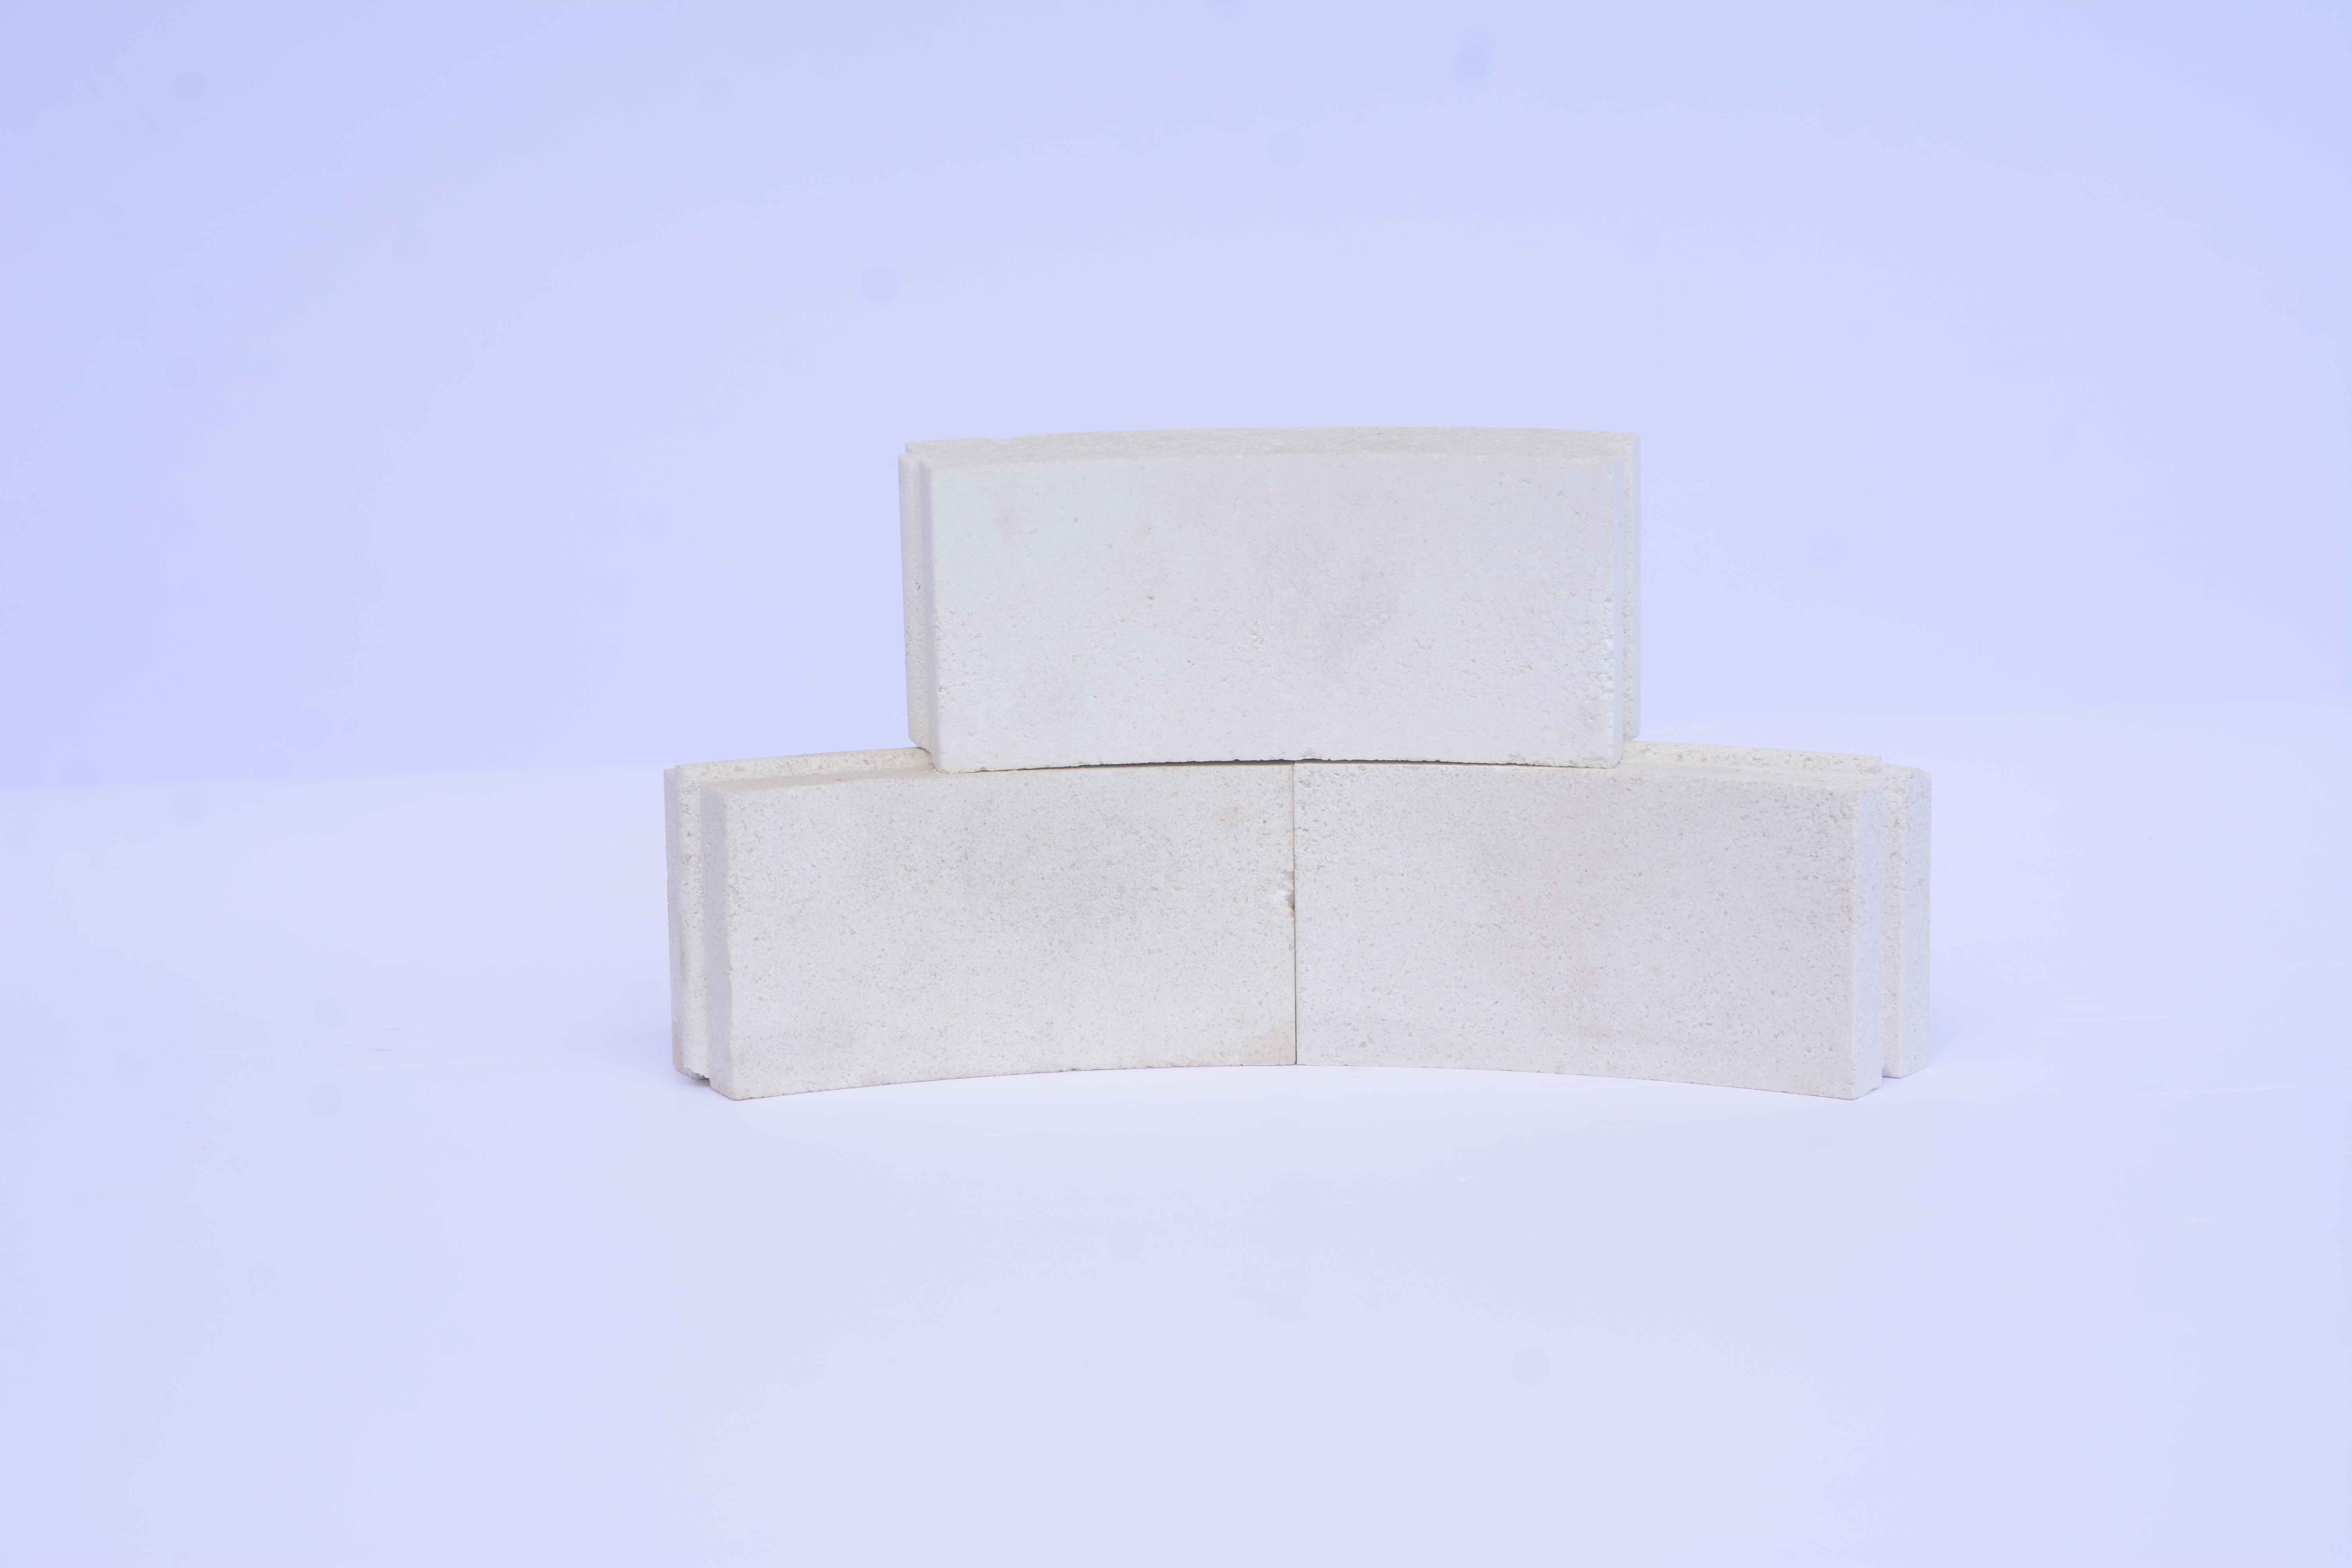 Zirconia Crucibles Market Analysis 2023-2030: Unveiling Size, Share, and Growth Projections  - Benzinga